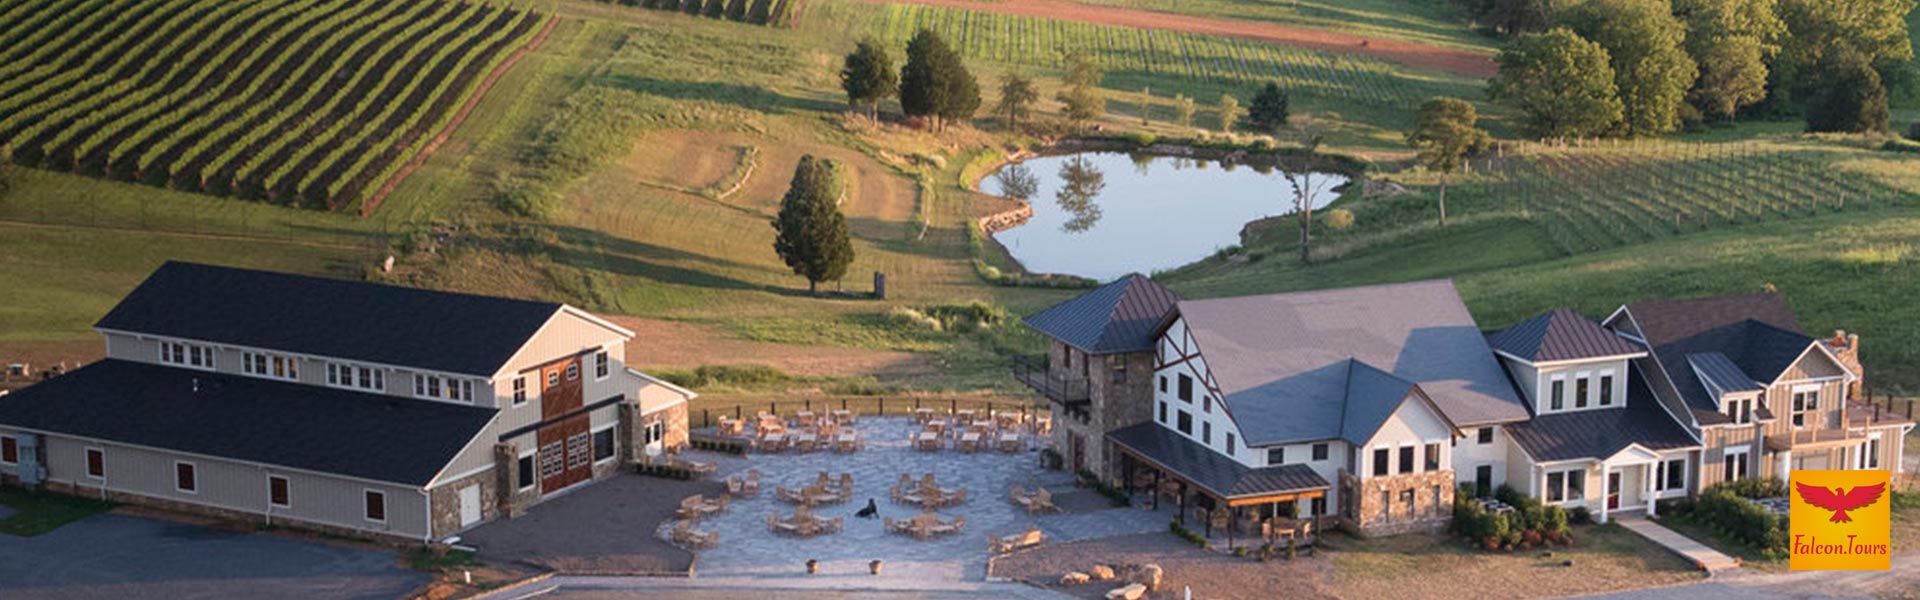 Falcon Cab & Falcon Tours - Call @ (703) 445-4450 - Winery - Stone Tower Winery